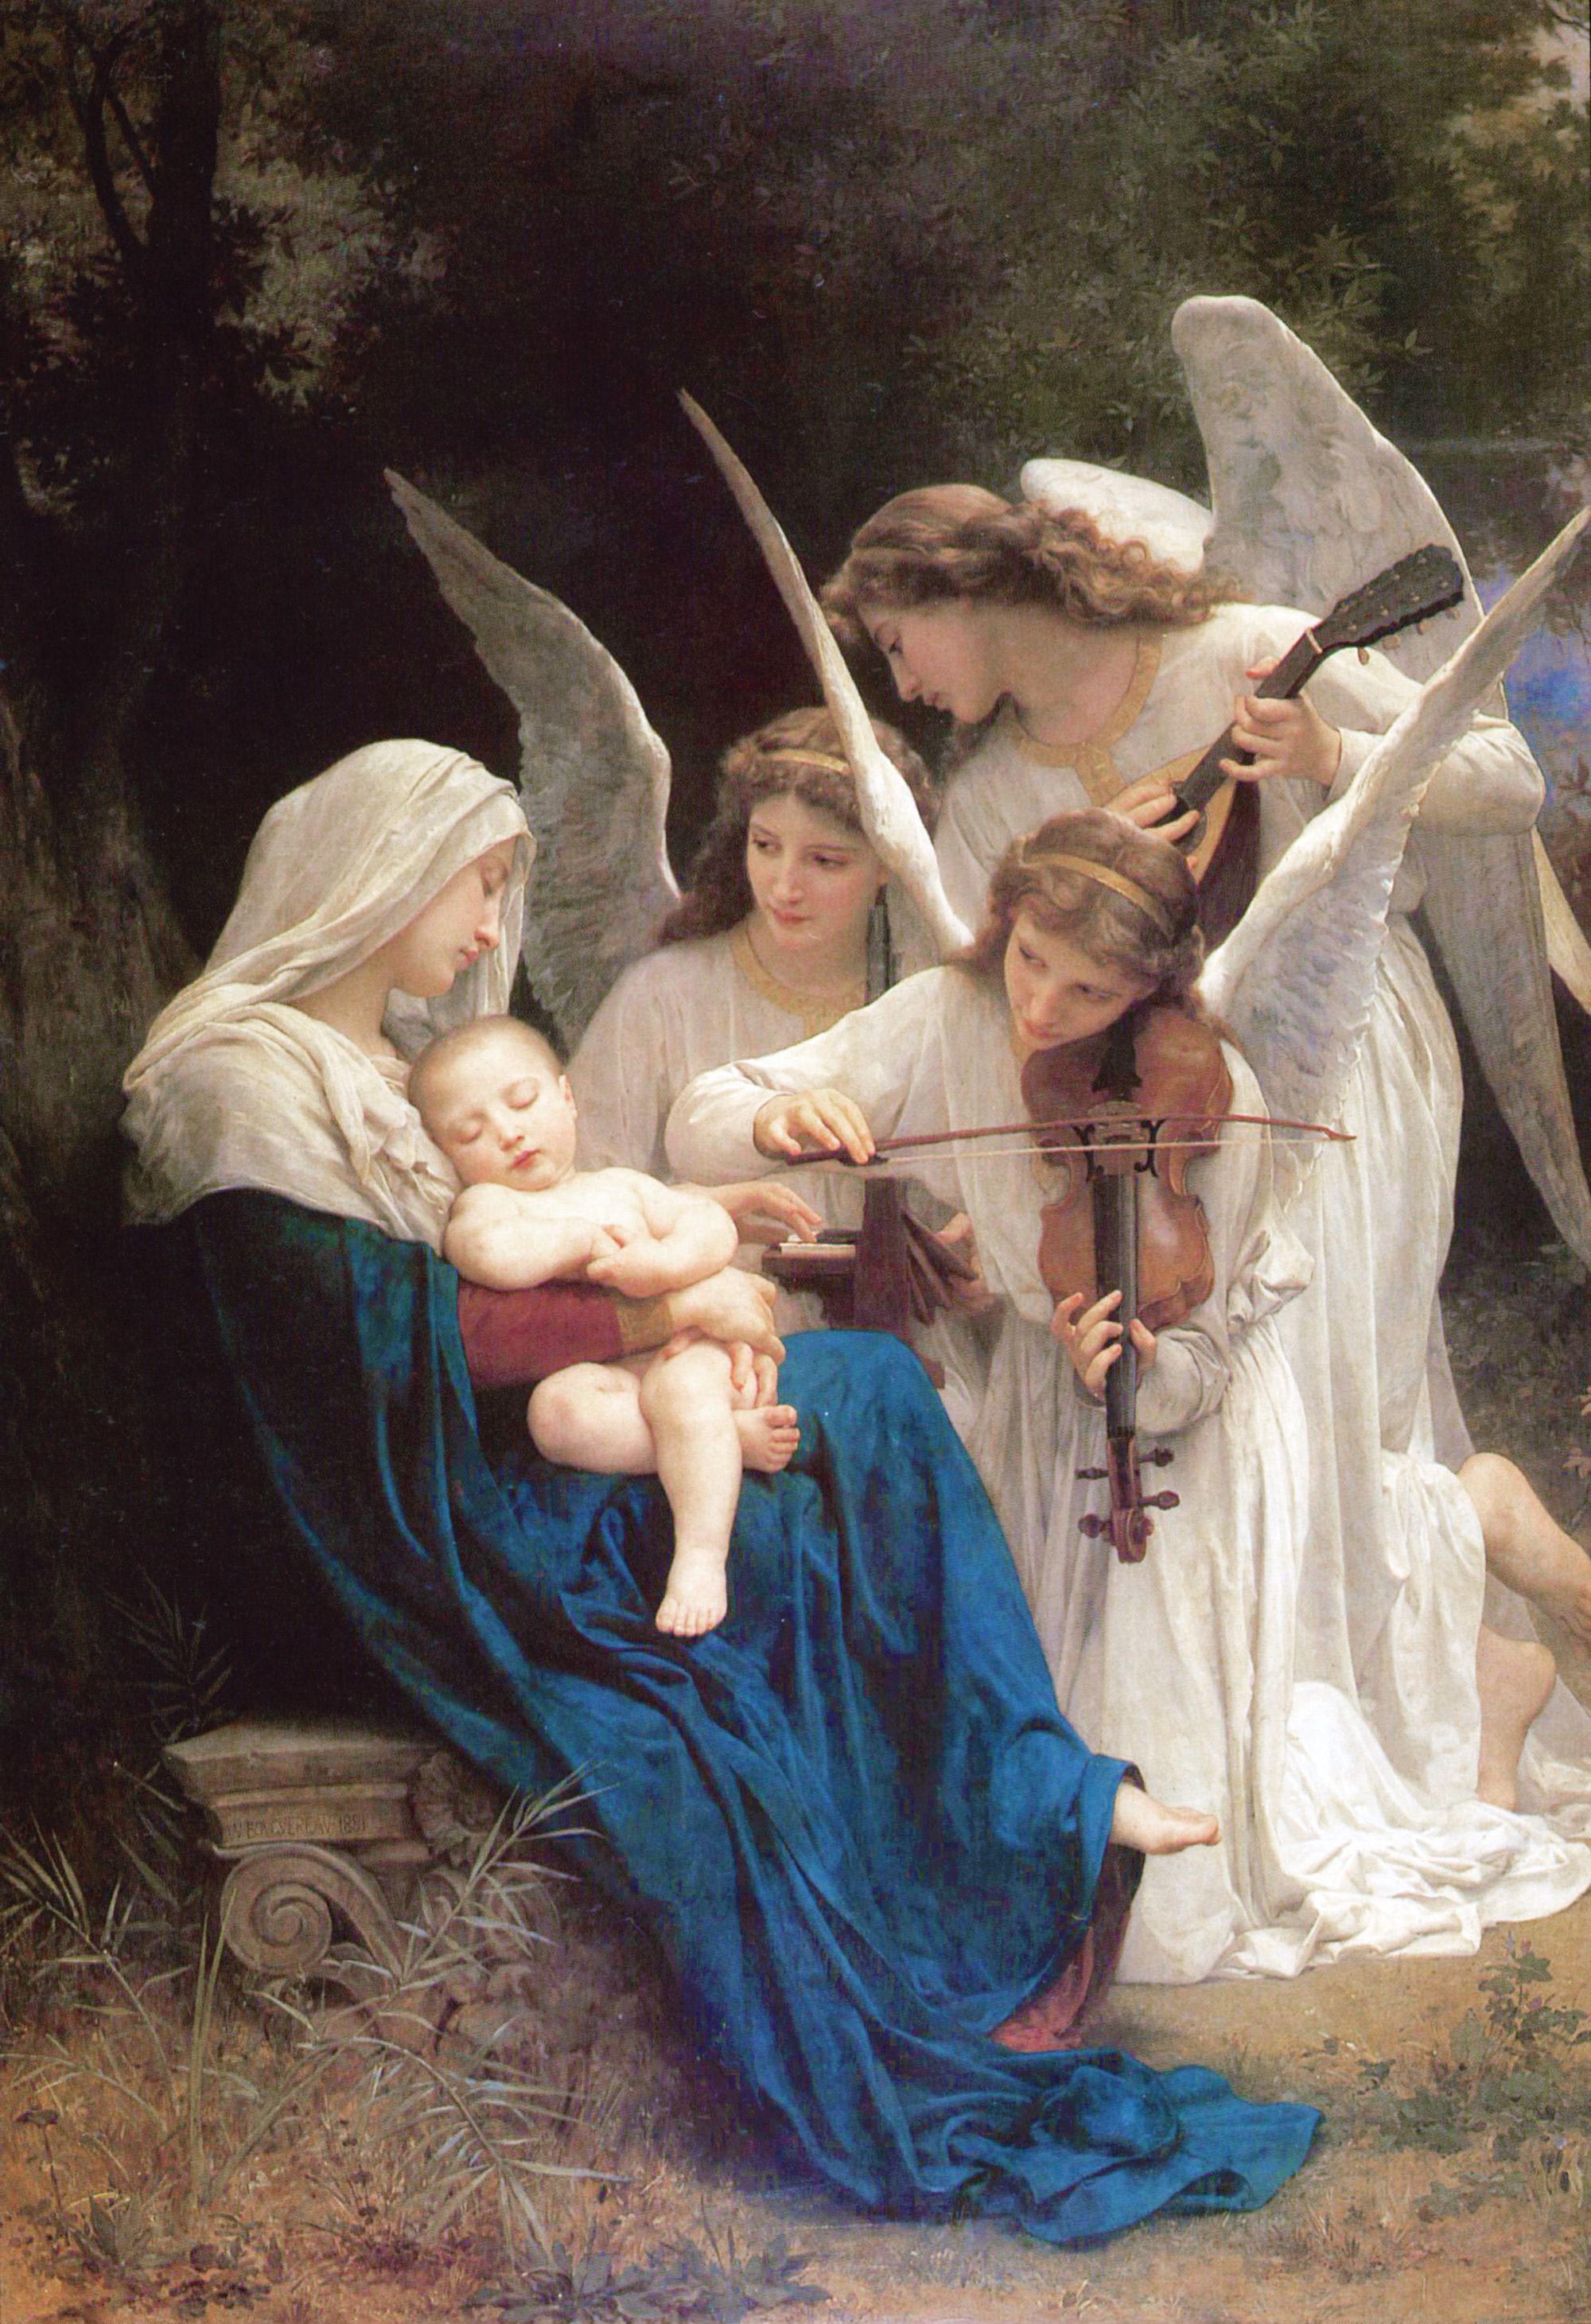 Divine Messengers: An Introduction to Angels - Free Catholic Course